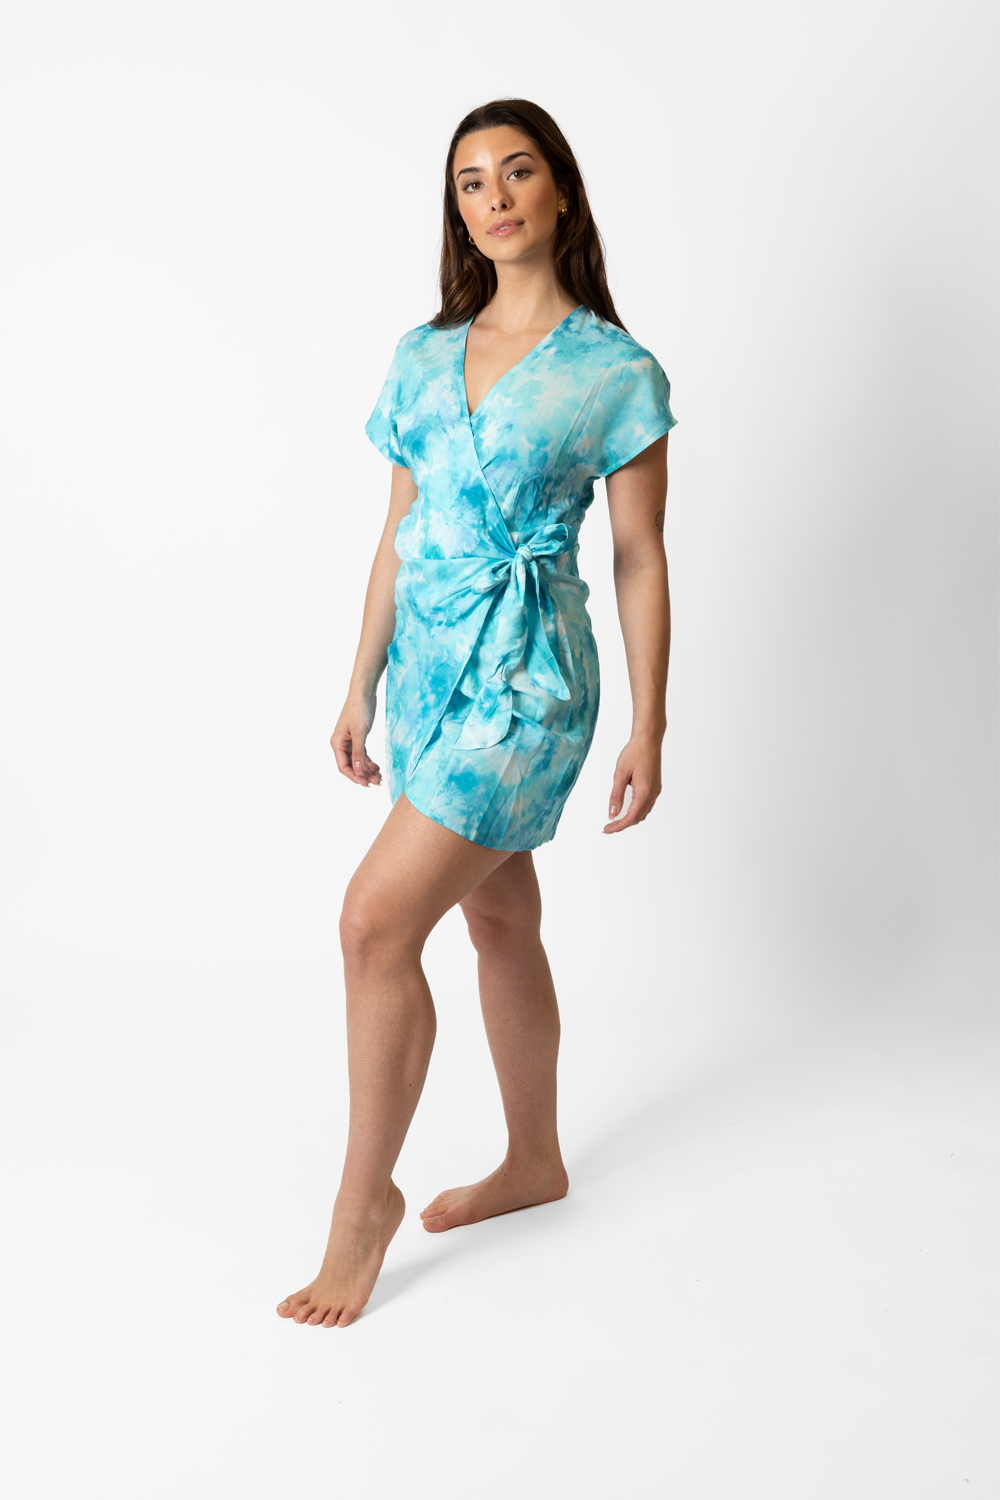 A woman in a blue tie-dye mini dress showing the knot on the side of her waist posing a confident and carefree attitude